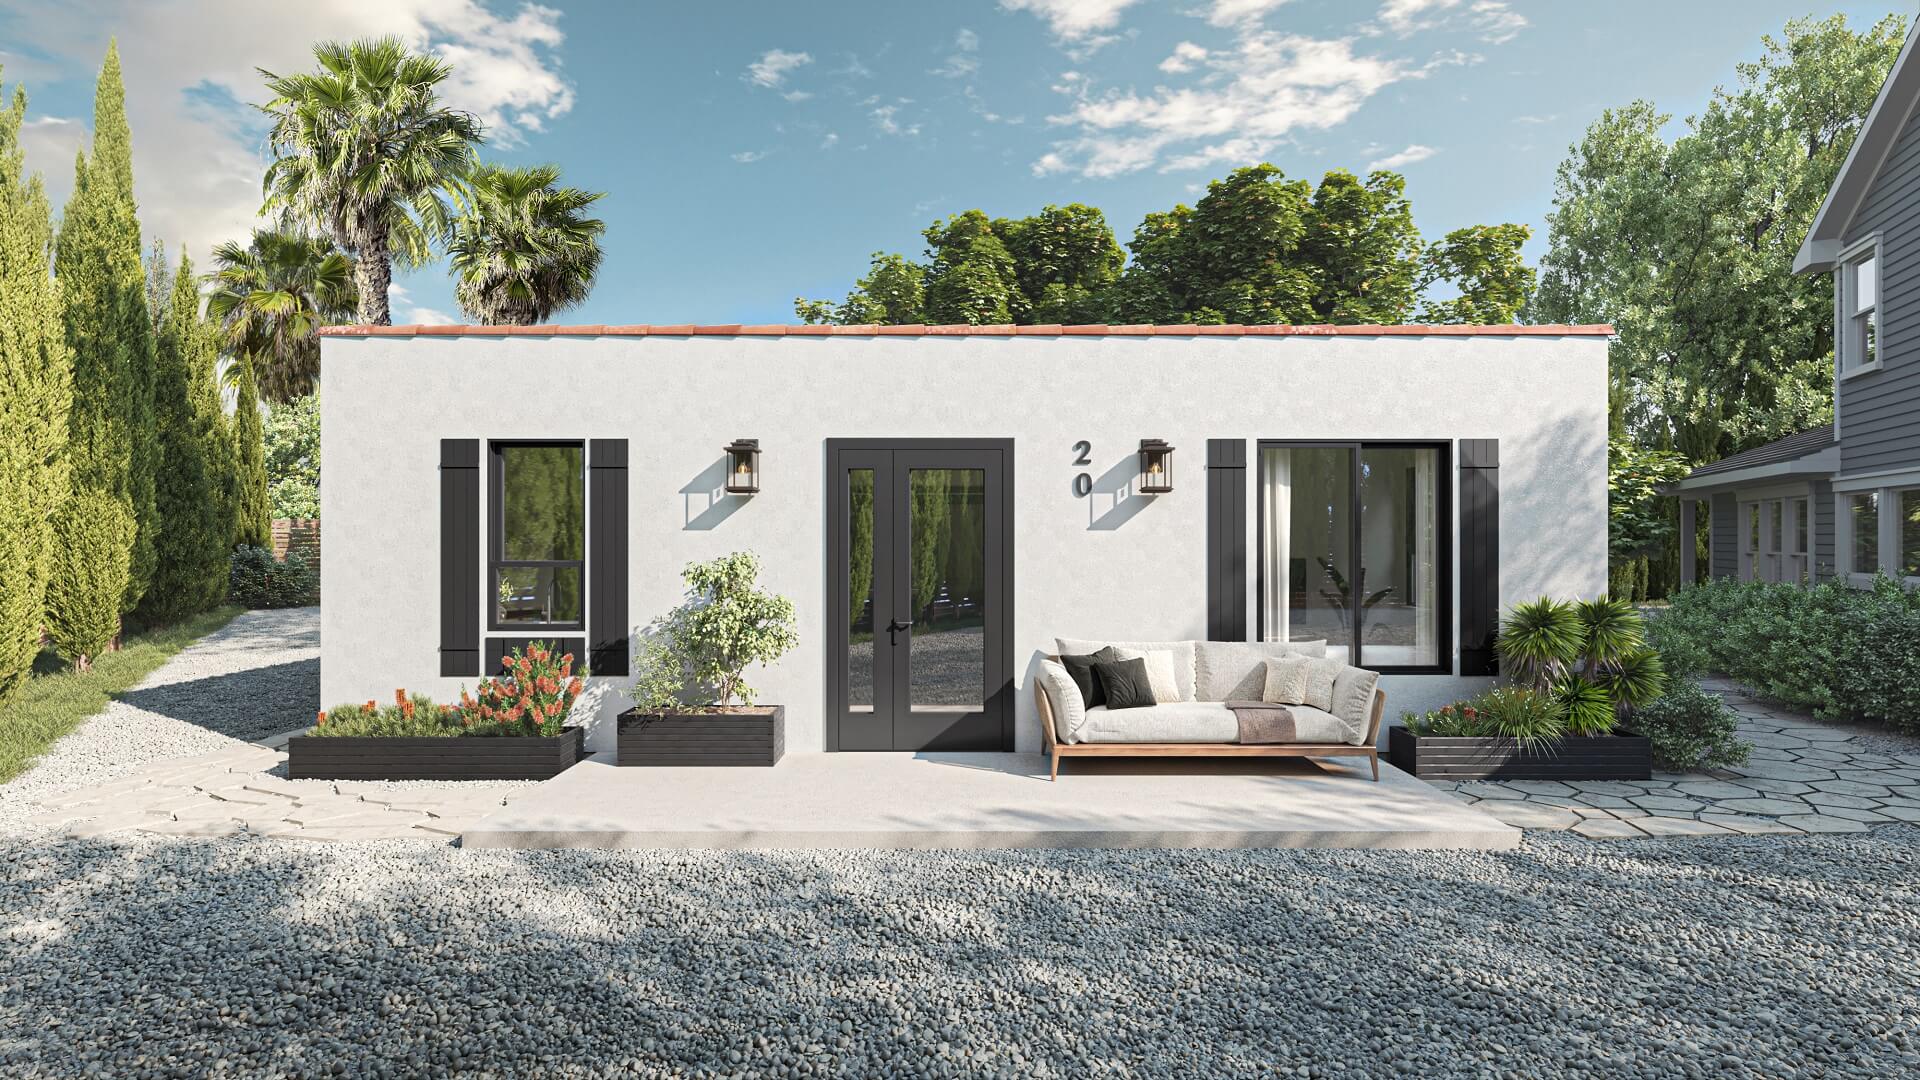 3D Renderings for Los Angeles Spanish-style Bungalow: Front VIew